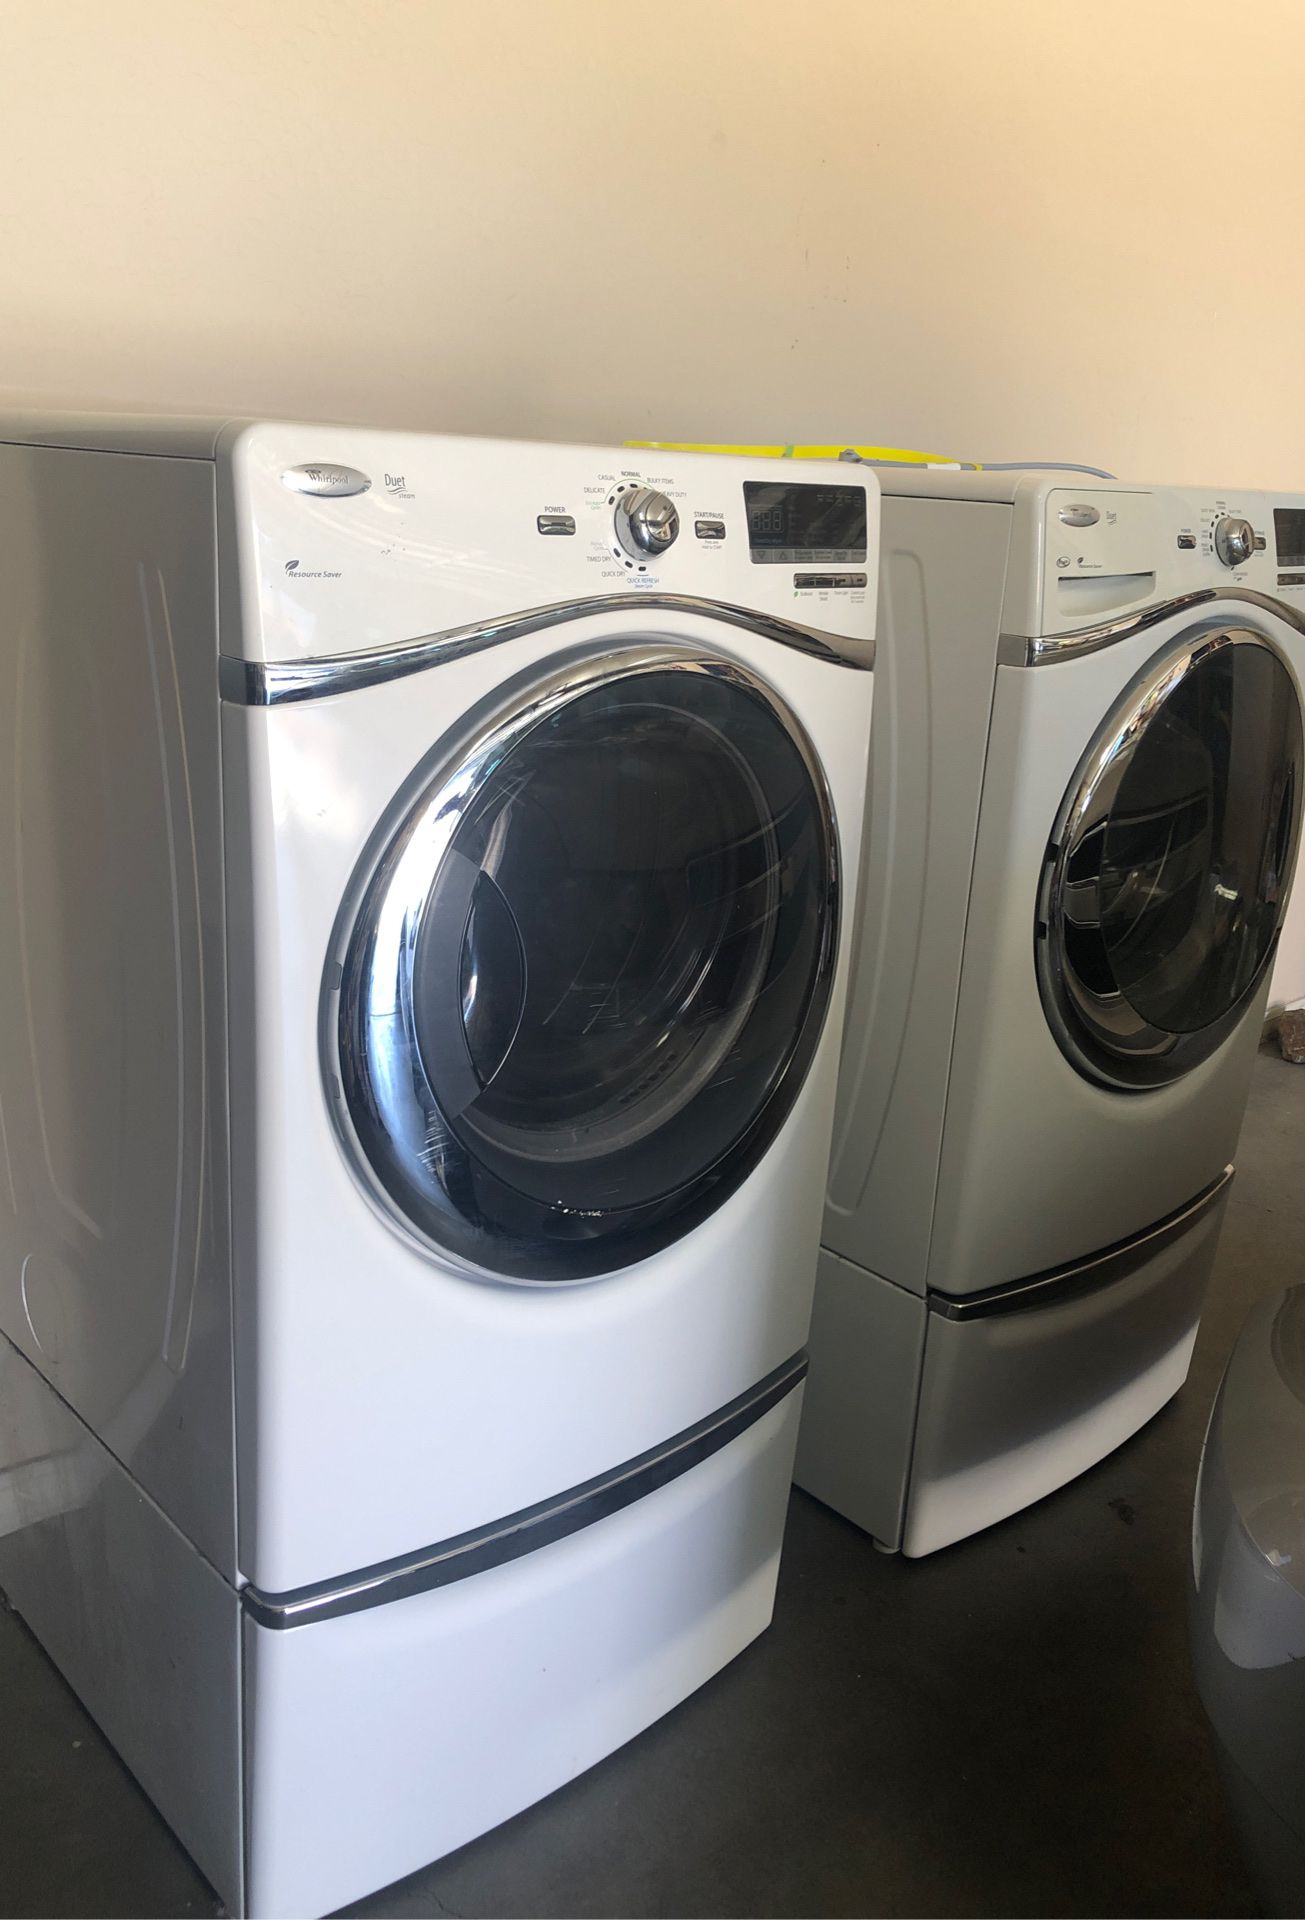 Whirlpool Duet washer electric dryer set with pedestals